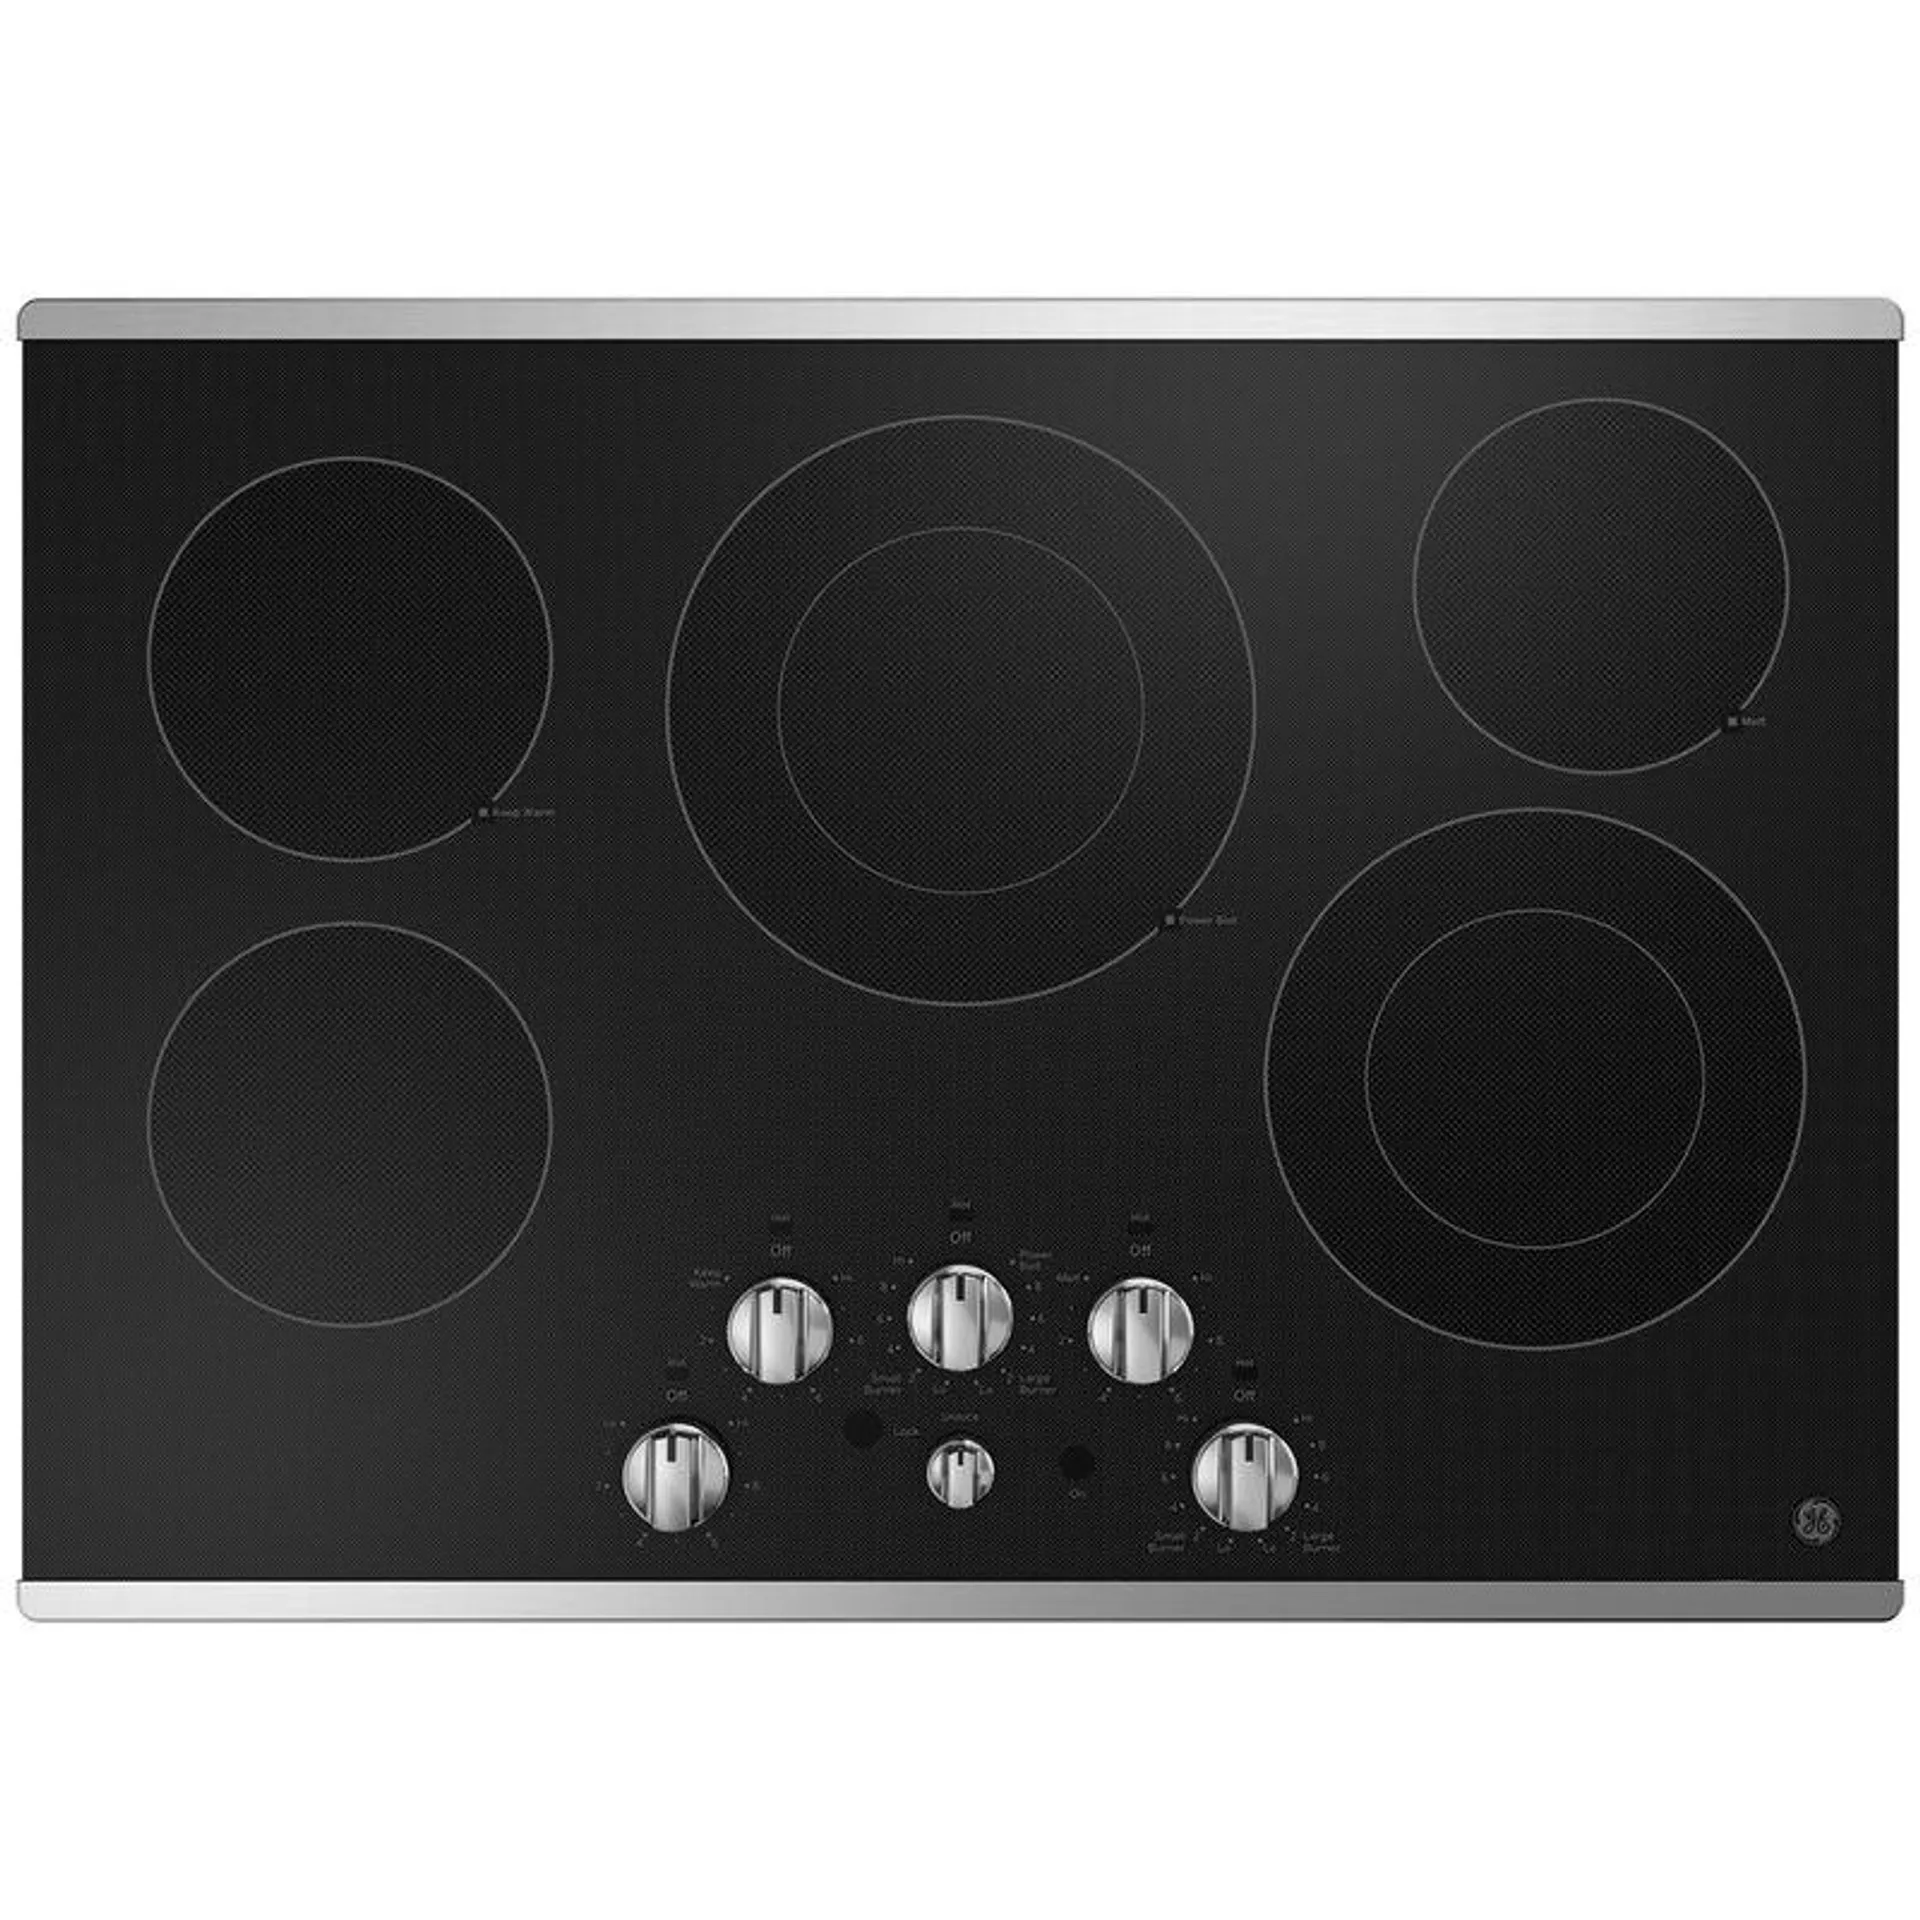 GE 30 in. Electric Cooktop with 5 Smoothtop Burners - Stainless Steel